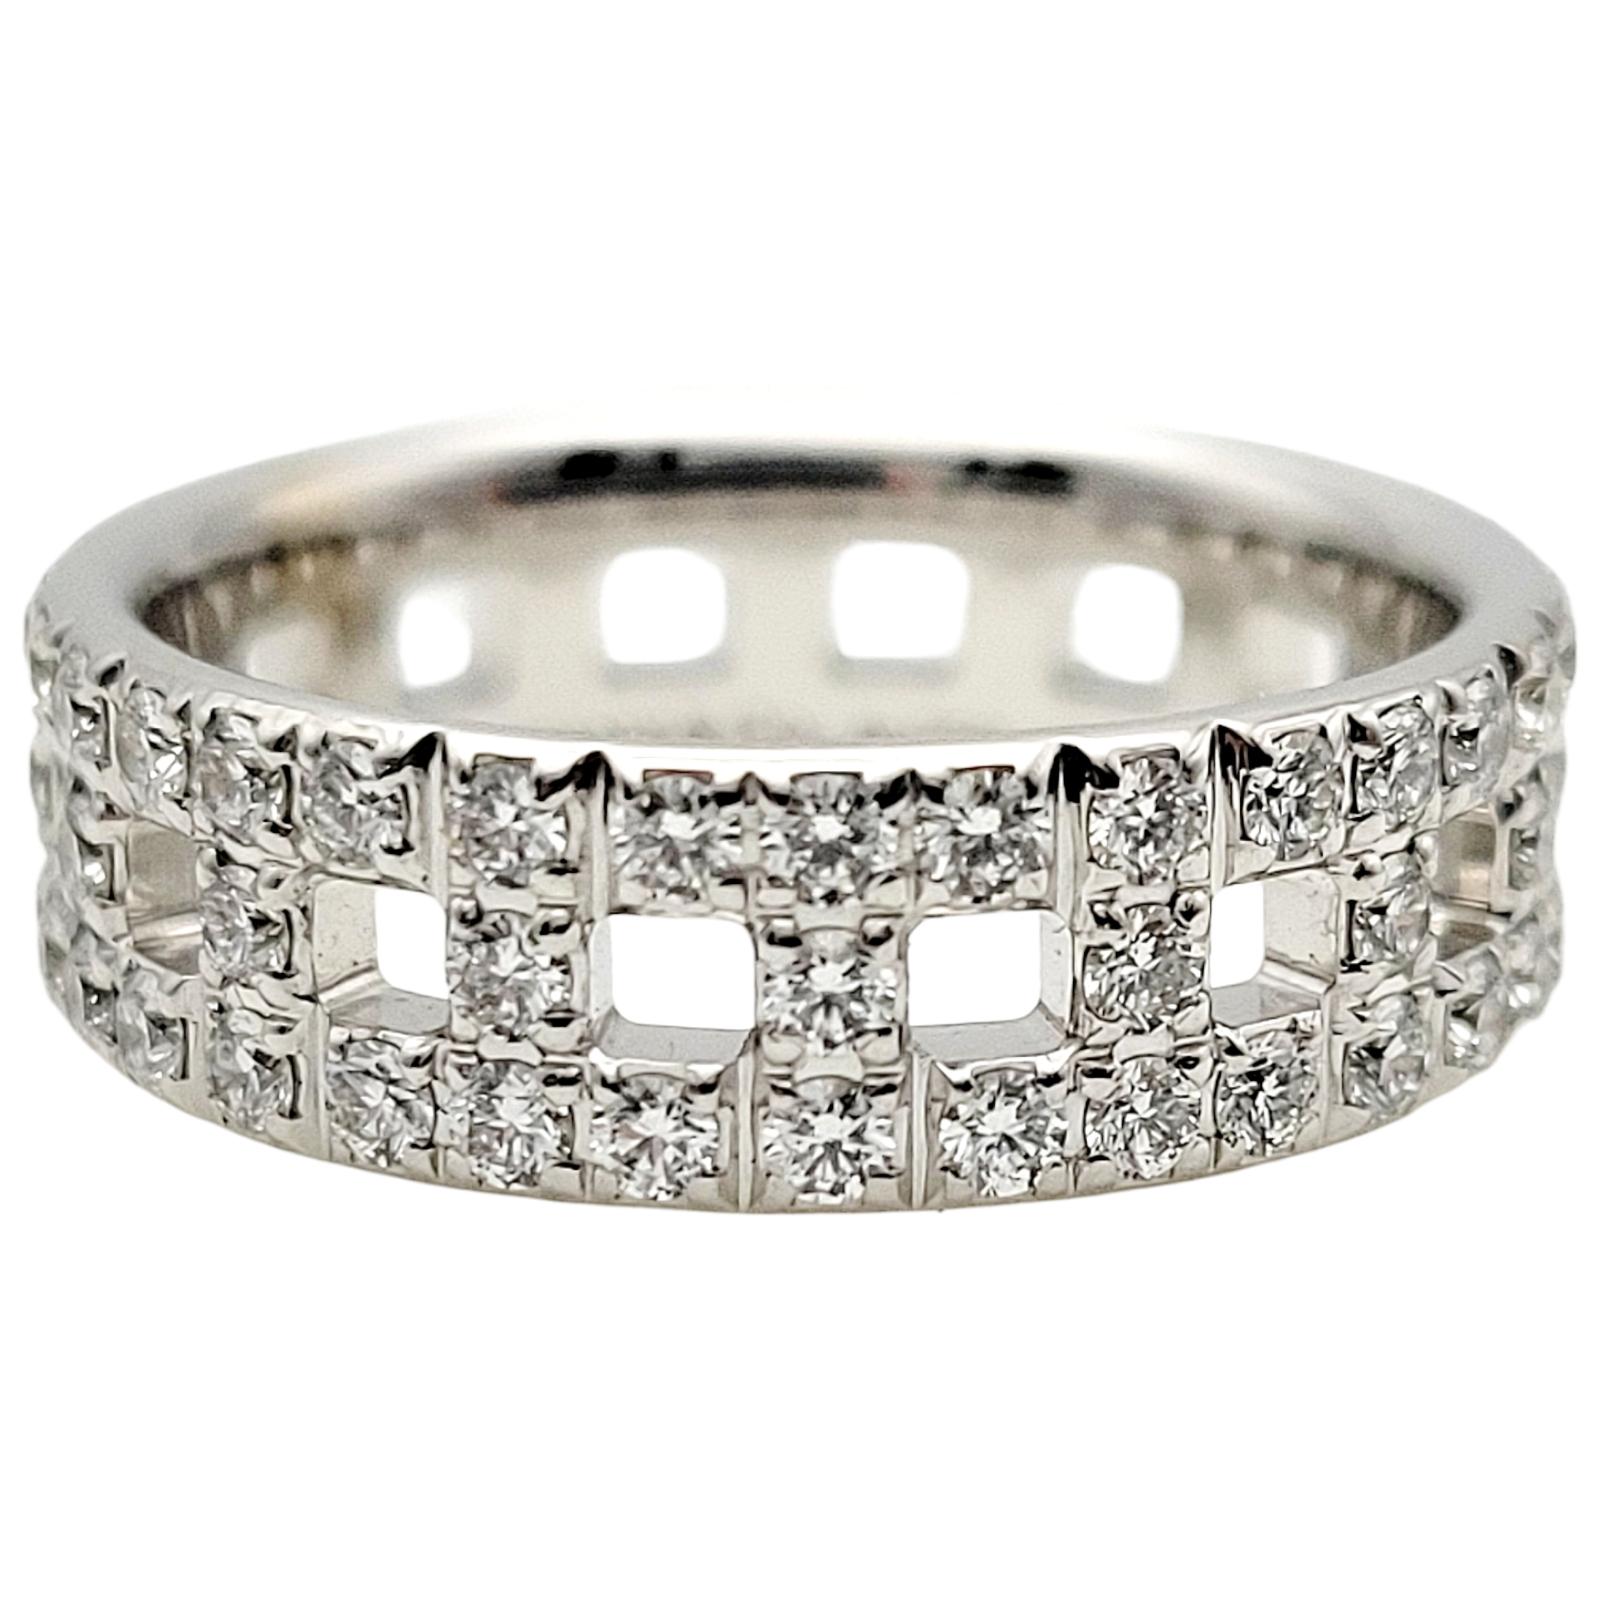 Ring size: 6

Introducing a stunning Tiffany & Co. True Wide Diamond ring in 18-karat white gold from the Tiffany T Collection. Founded in 1837 in New York City, Tiffany & Co. is one of the world's most storied luxury design houses recognized